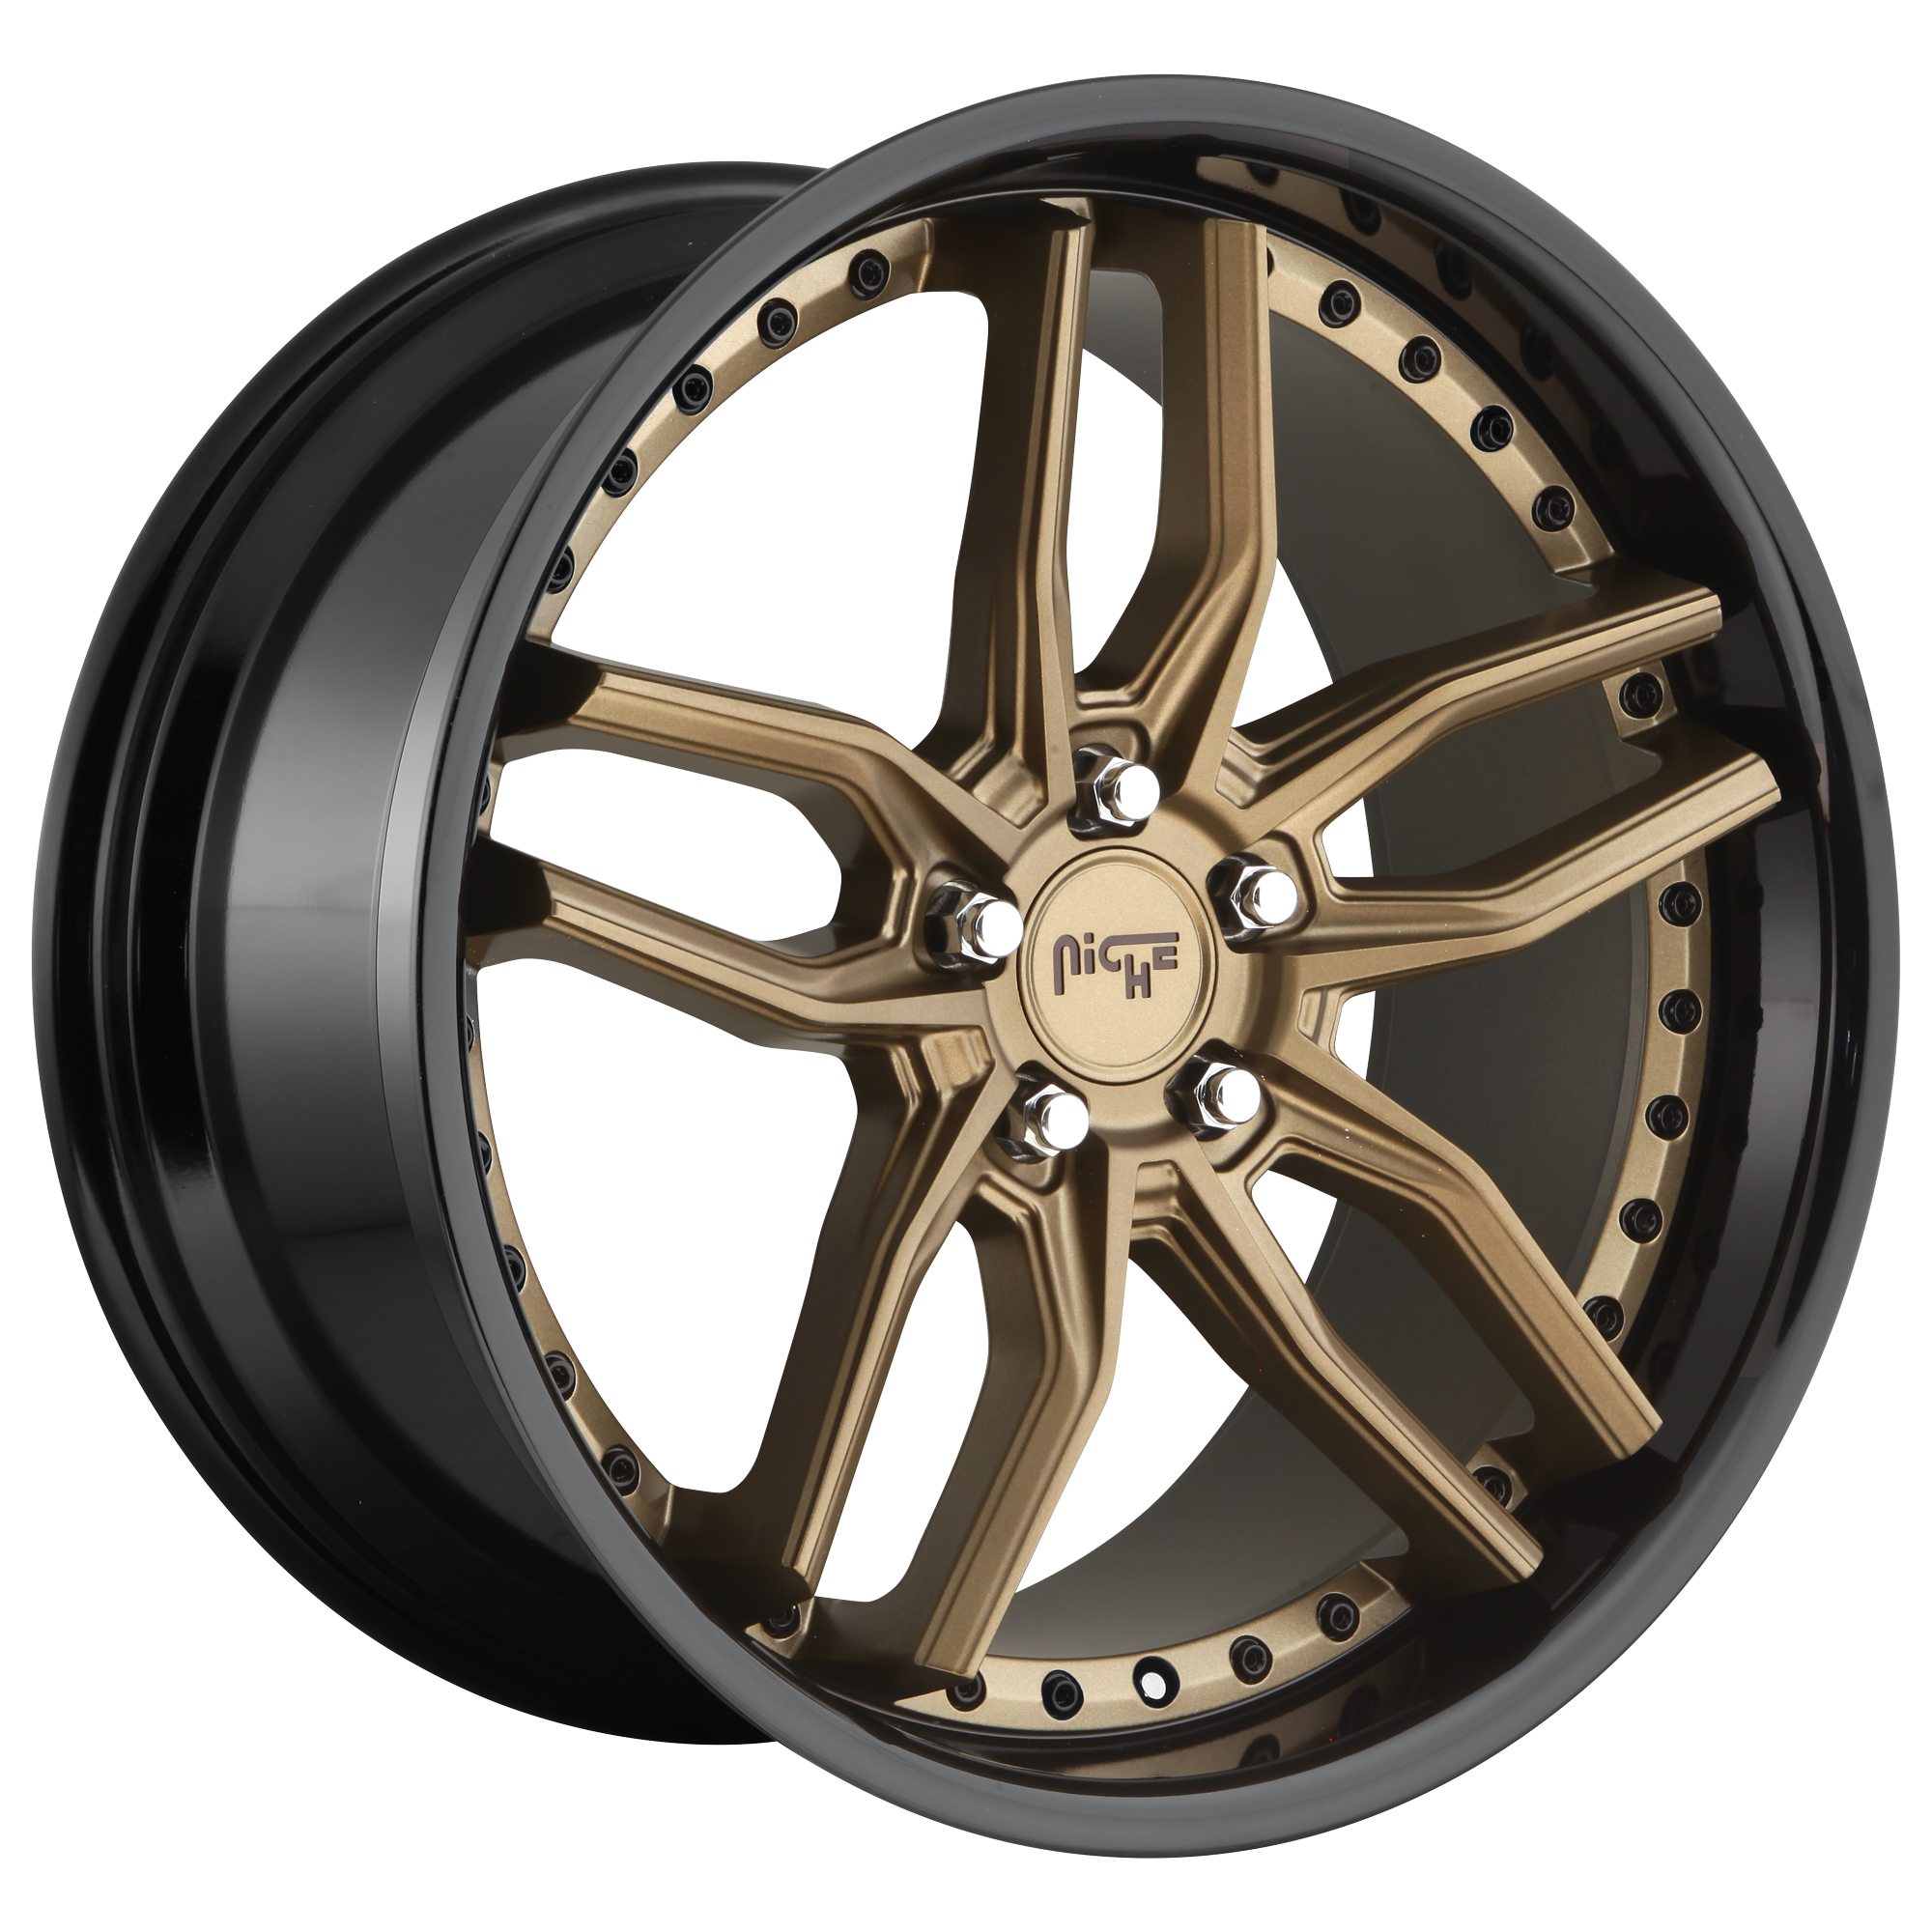 METHOS 20x10.5 5x120.00 MATTE BRONZE BLACK BEAD RING (35 mm) - Tires and Engine Performance